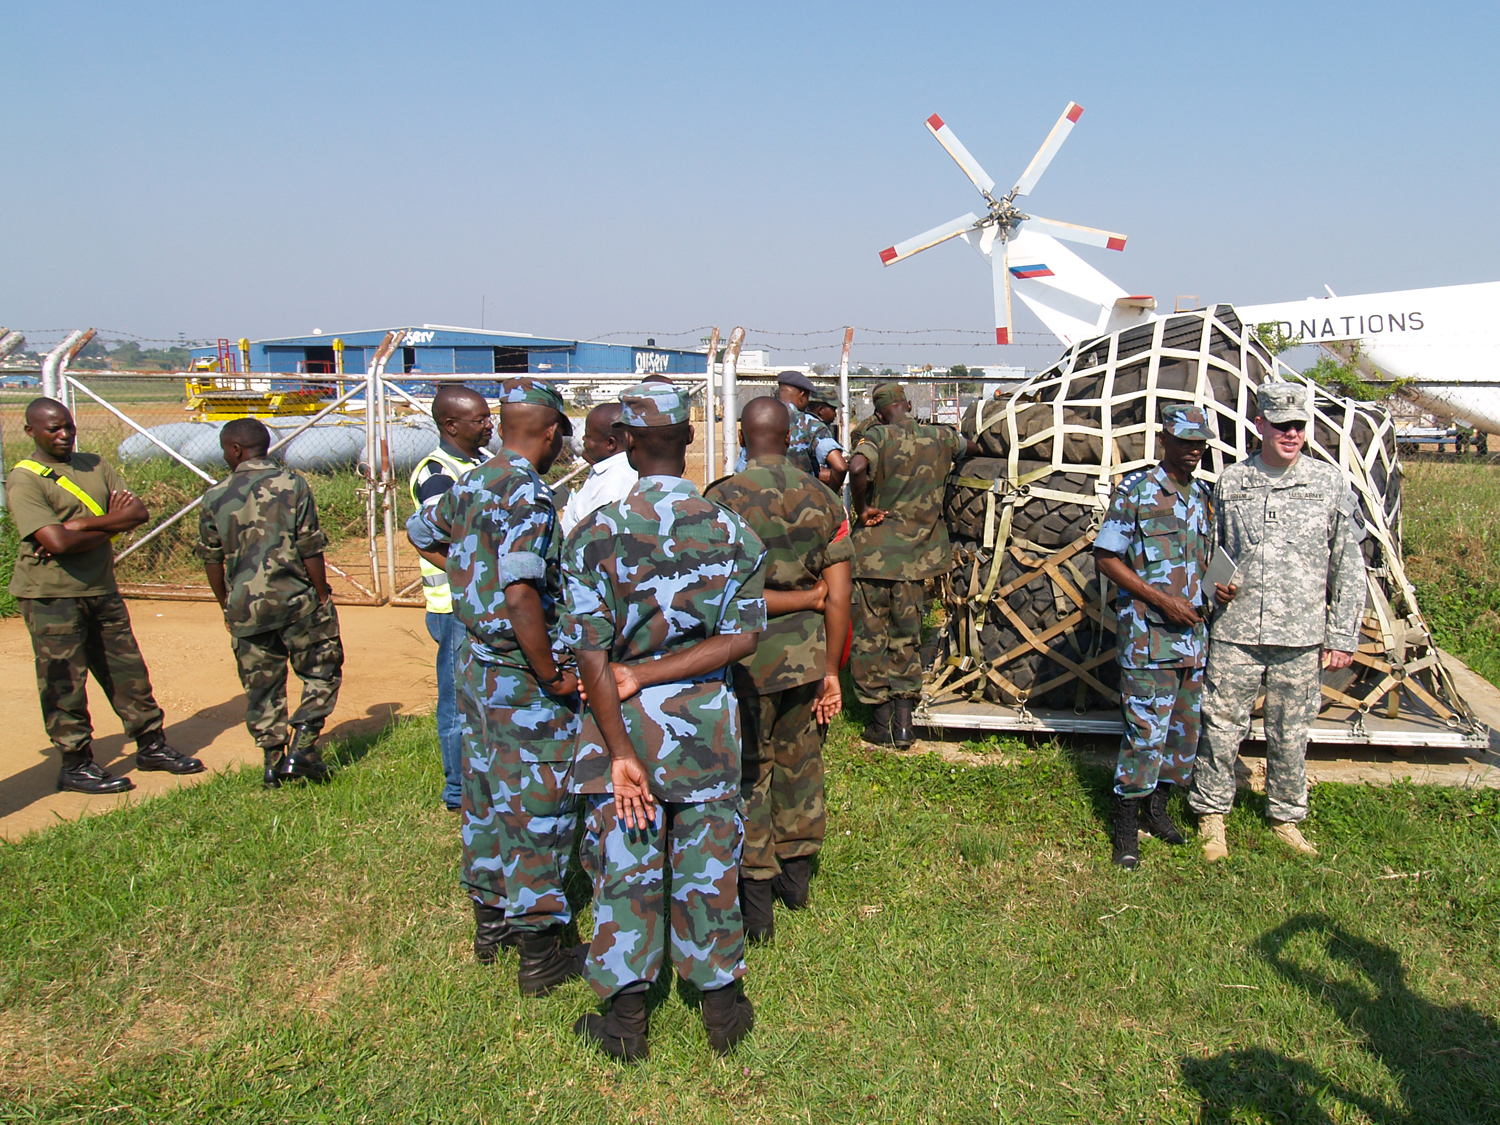 men in camouflage uniforms and one man standing with a large object